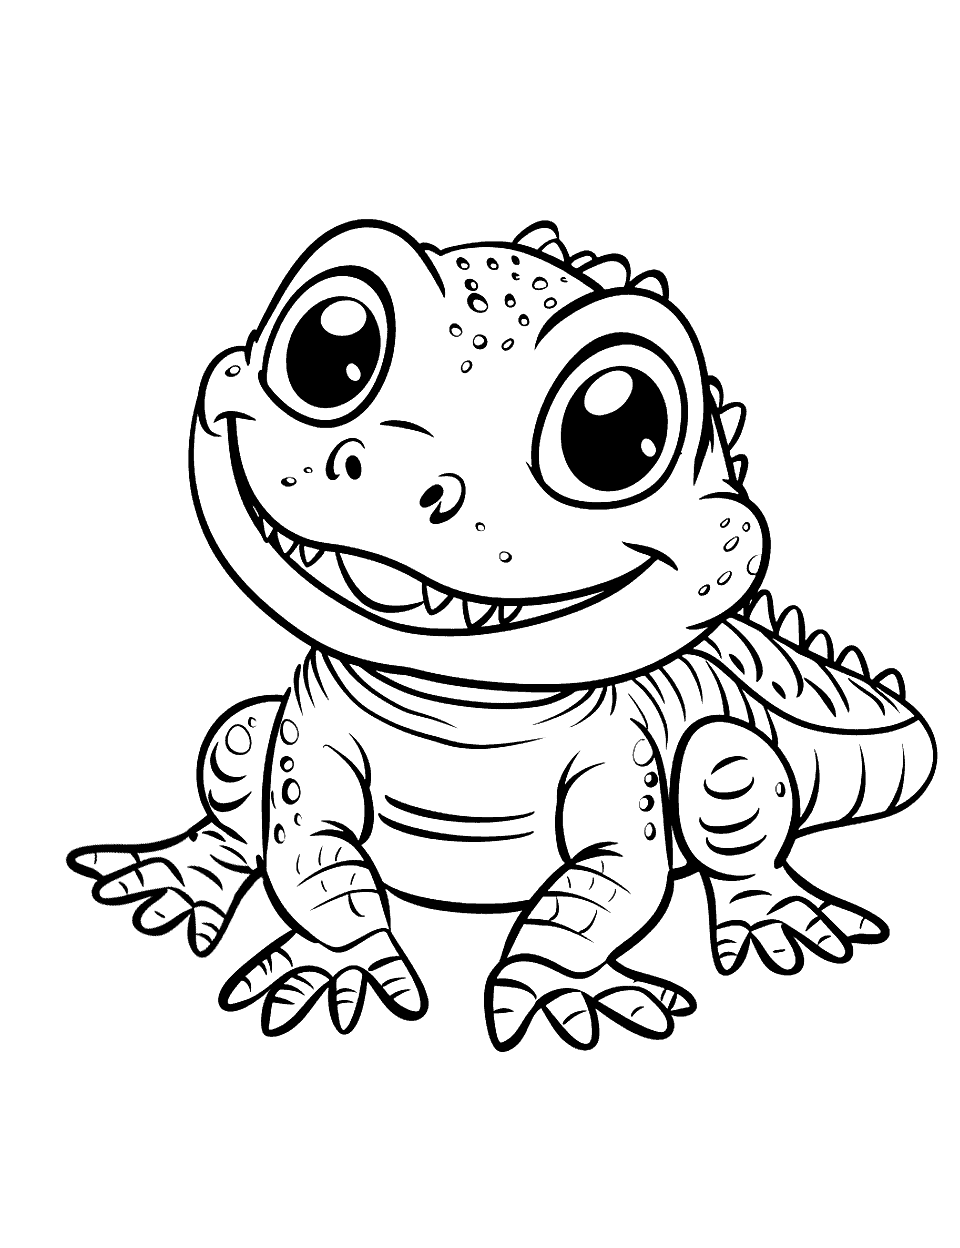 Cute Baby Alligator Coloring Page - A cute baby alligator with big, friendly eyes and a wide smile.